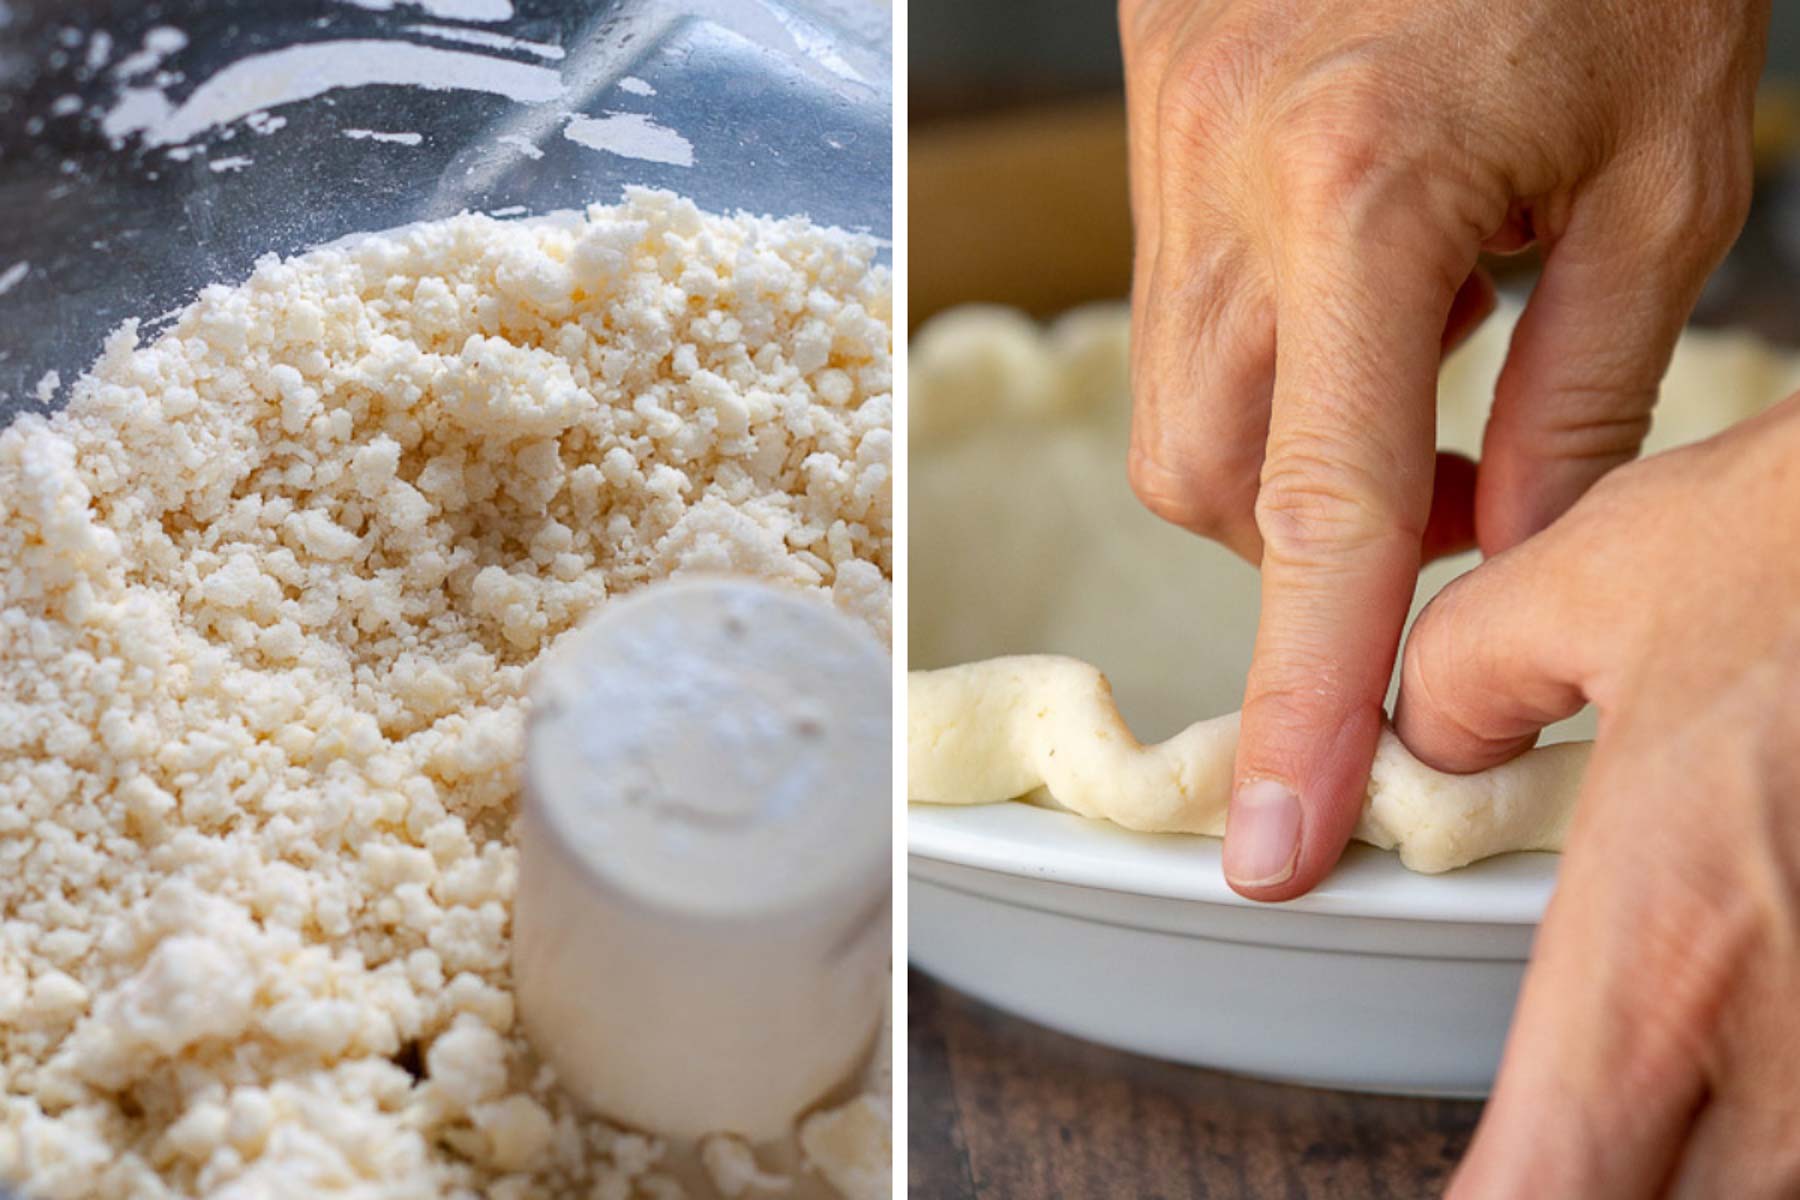 more images showing how to make gluten free pie crust